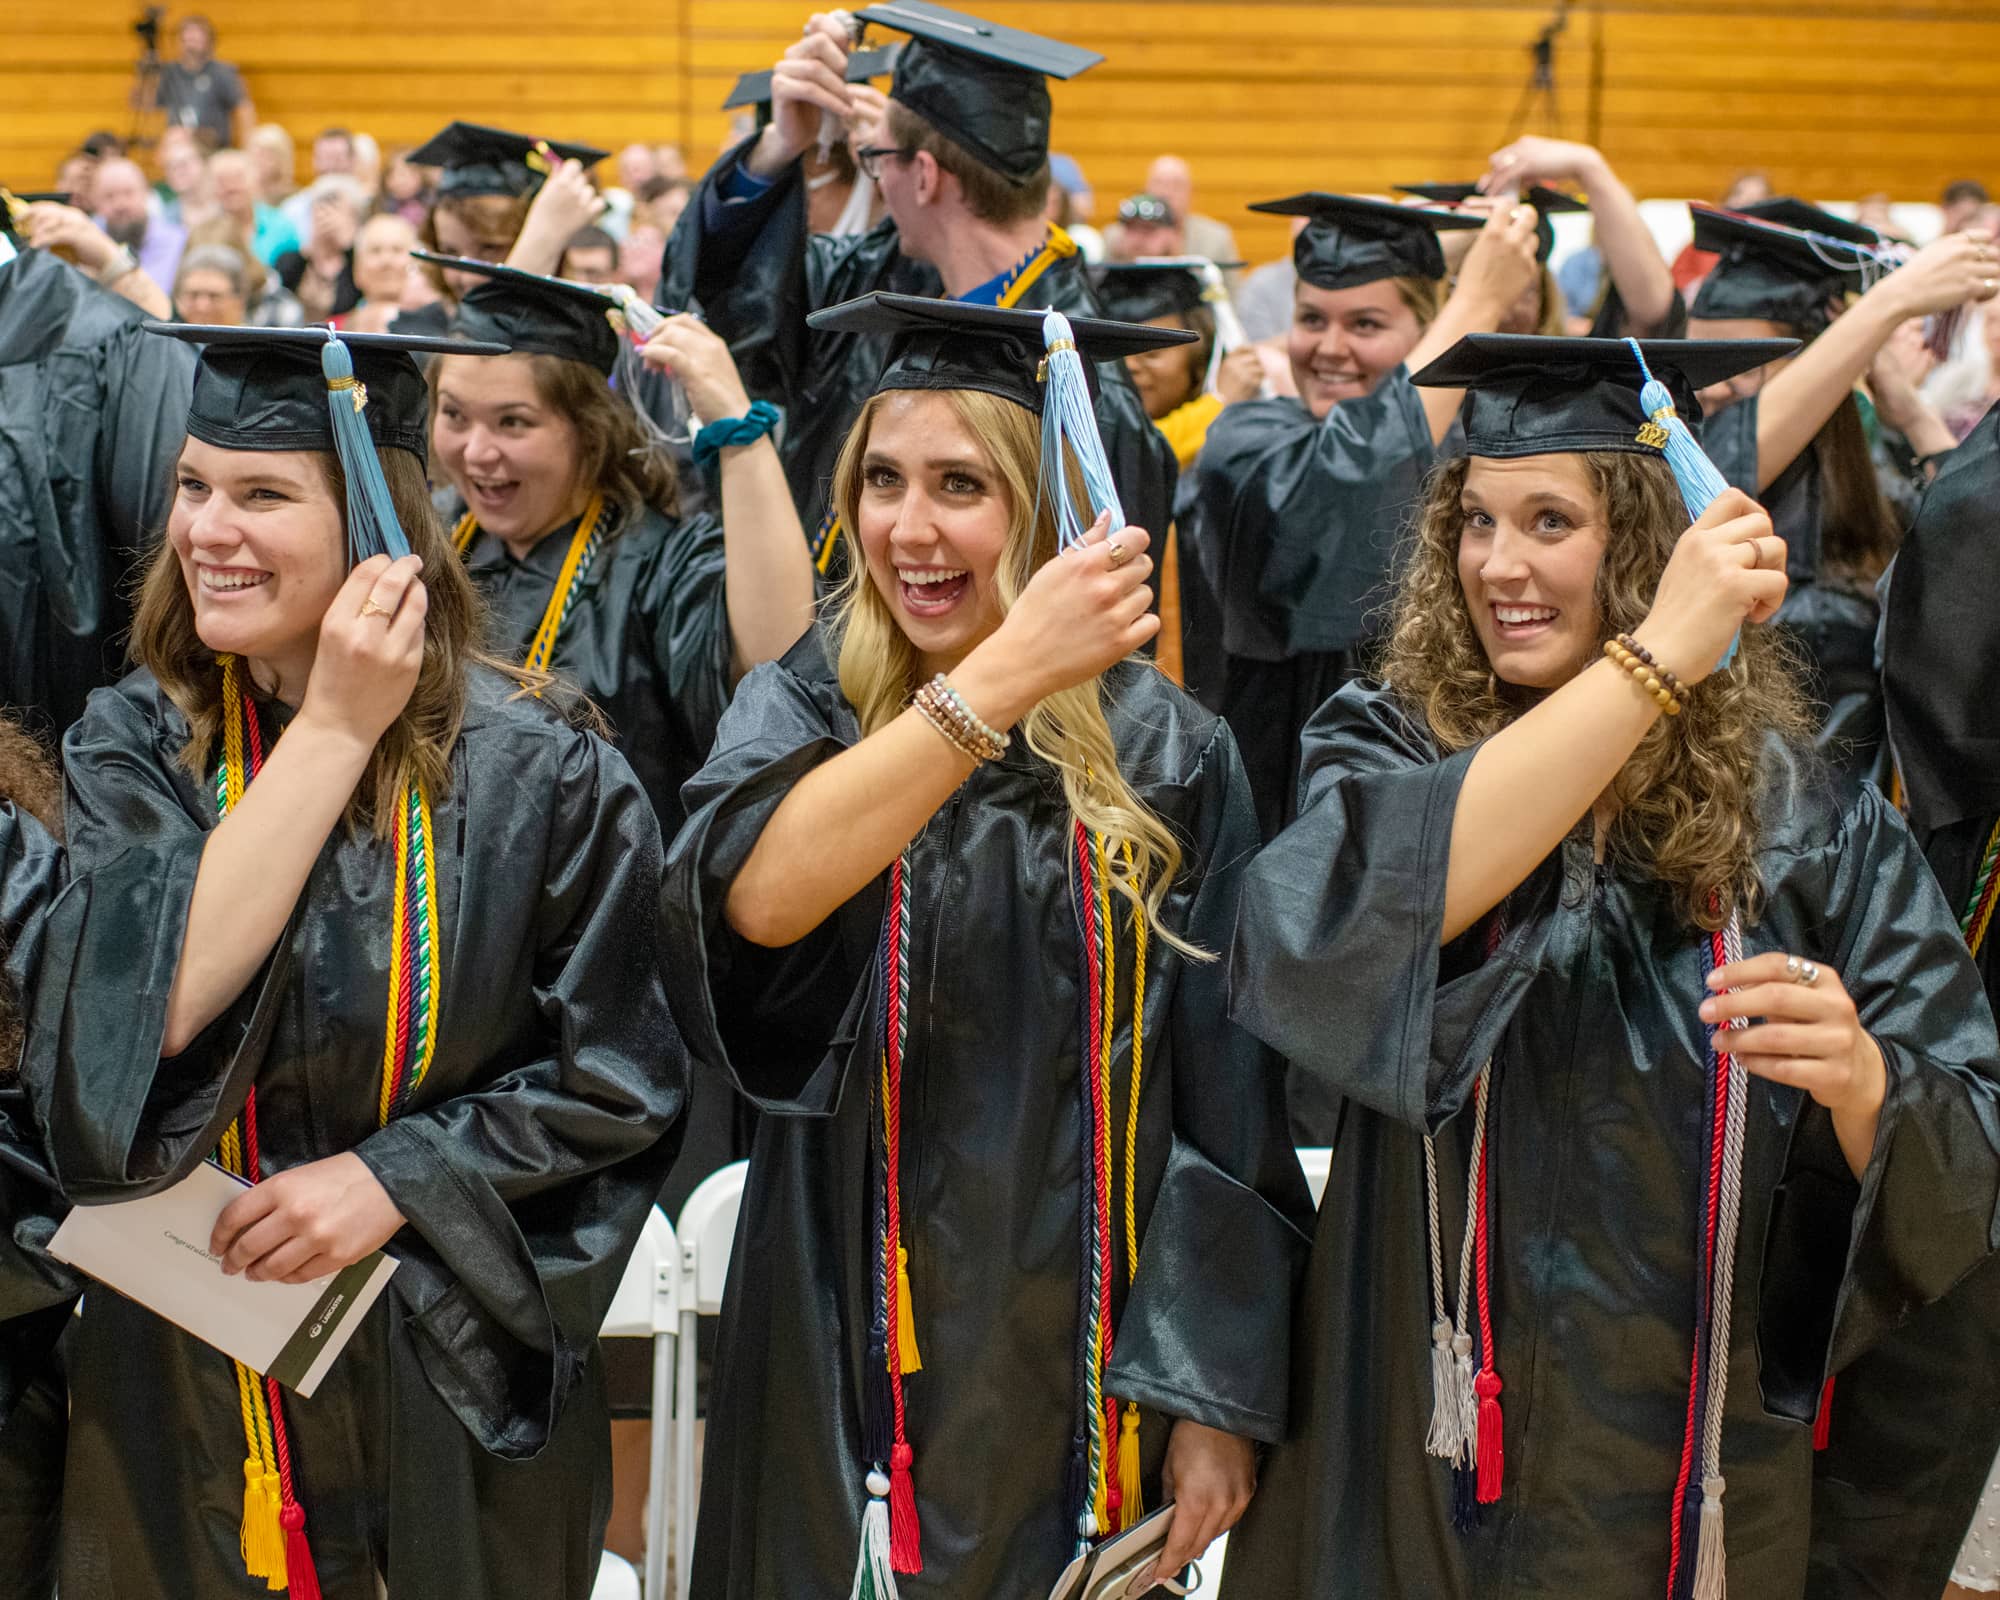 Students move their tassels to the left during a graduation recognition ceremony at the Lancaster Campus.